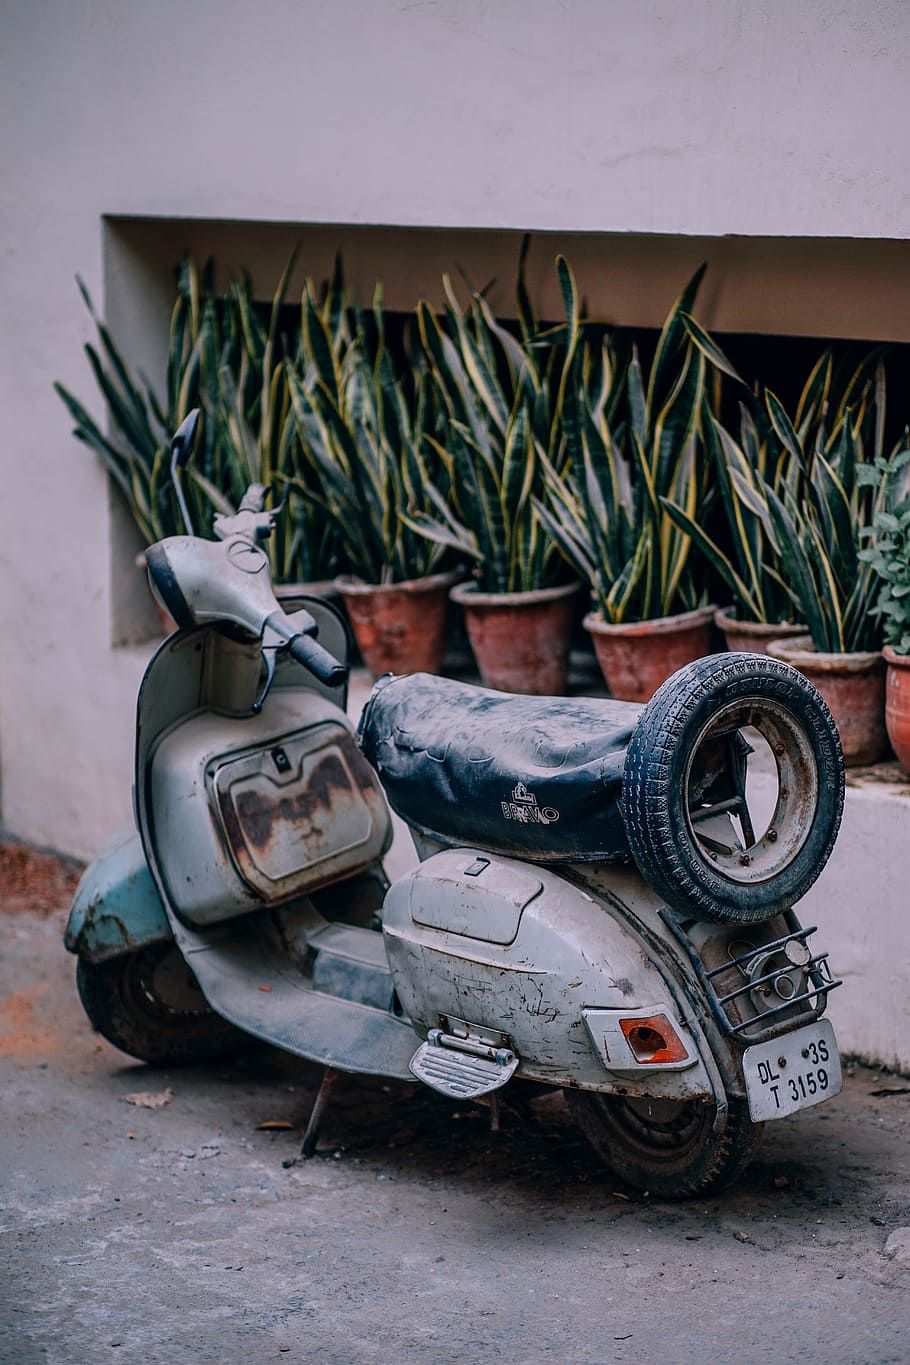 grey, motor scooter, parked, snake plants, daytime, ancient, bike, central, city, classic